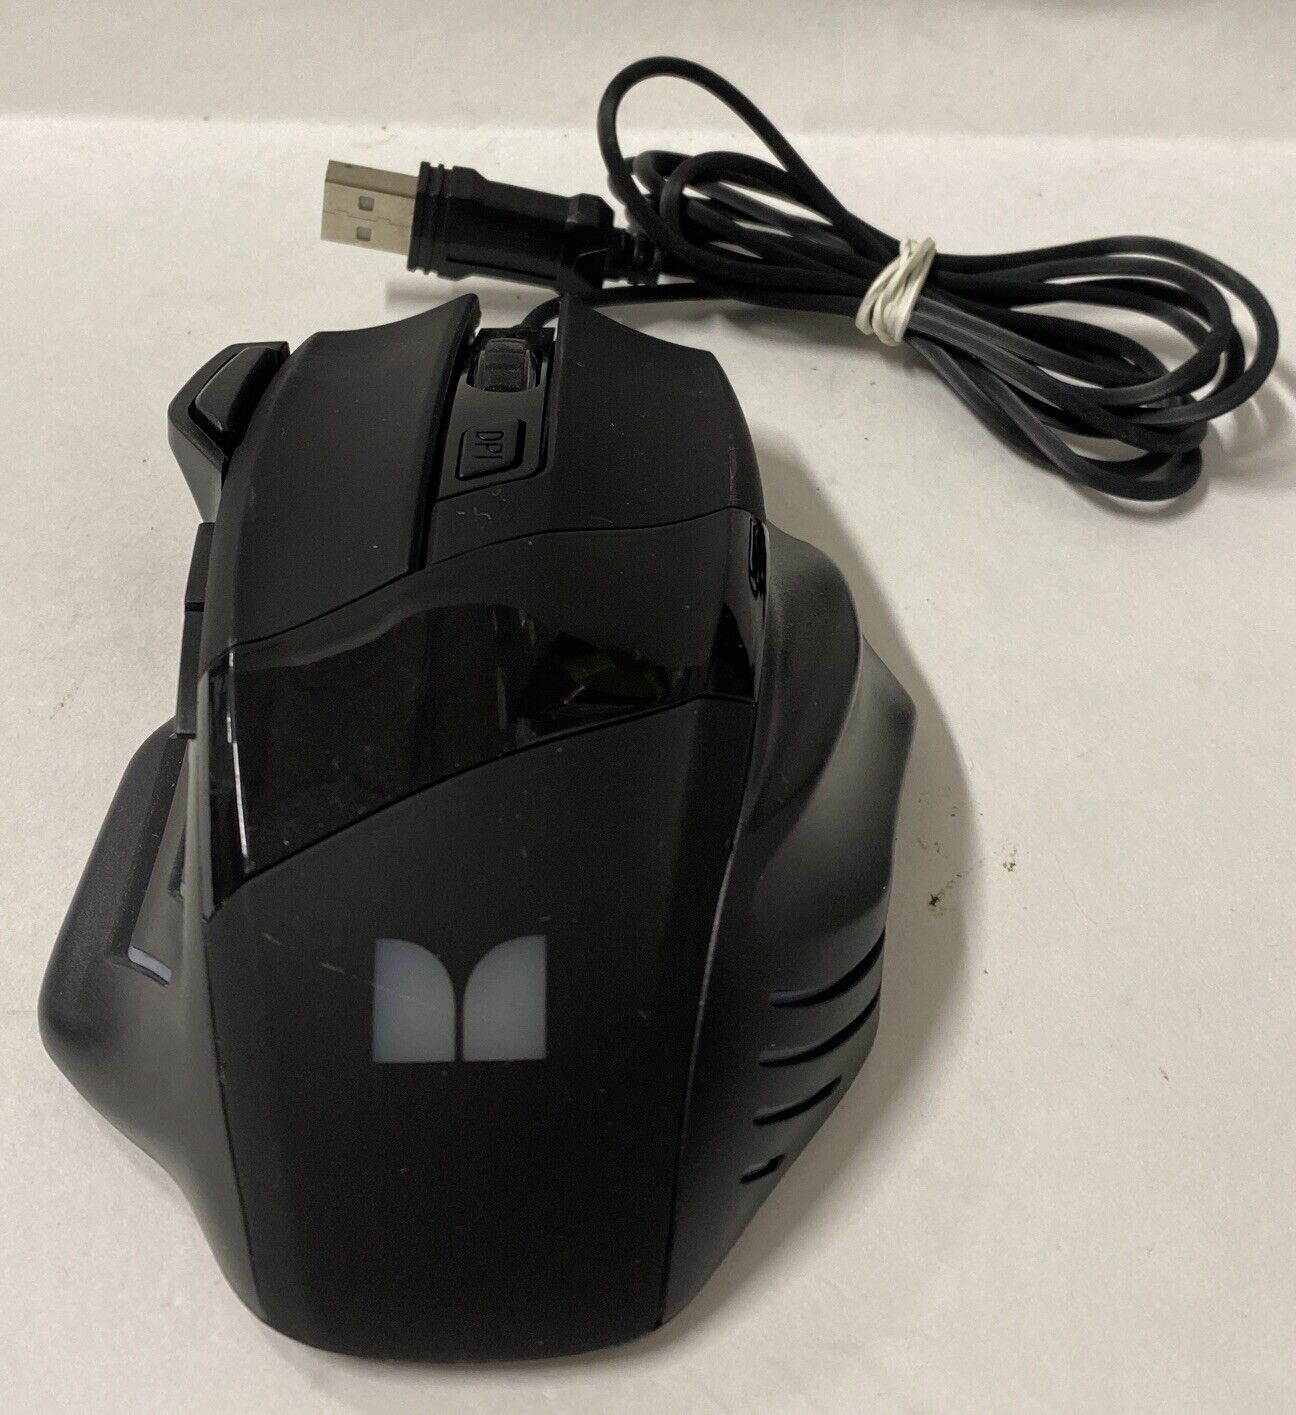 Monster Color-Changing LED Wired Optical Gaming Mouse